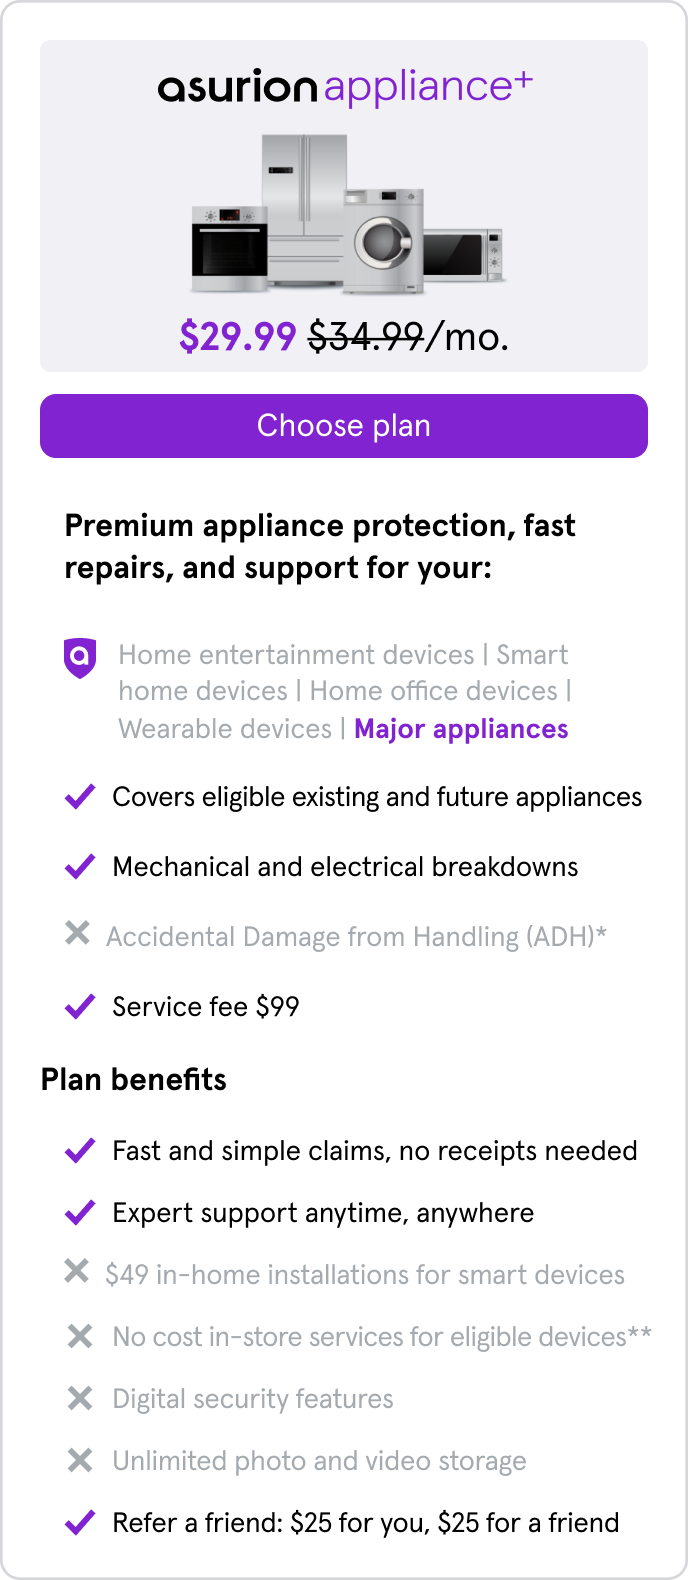 Appliance+. $29.99/mo. Covers eligible existing & future major appliances for mechanical/electrical breakdowns. Service fee $99. Fast and simple claims, no receipts needed. Expert support anytime, anywhere.